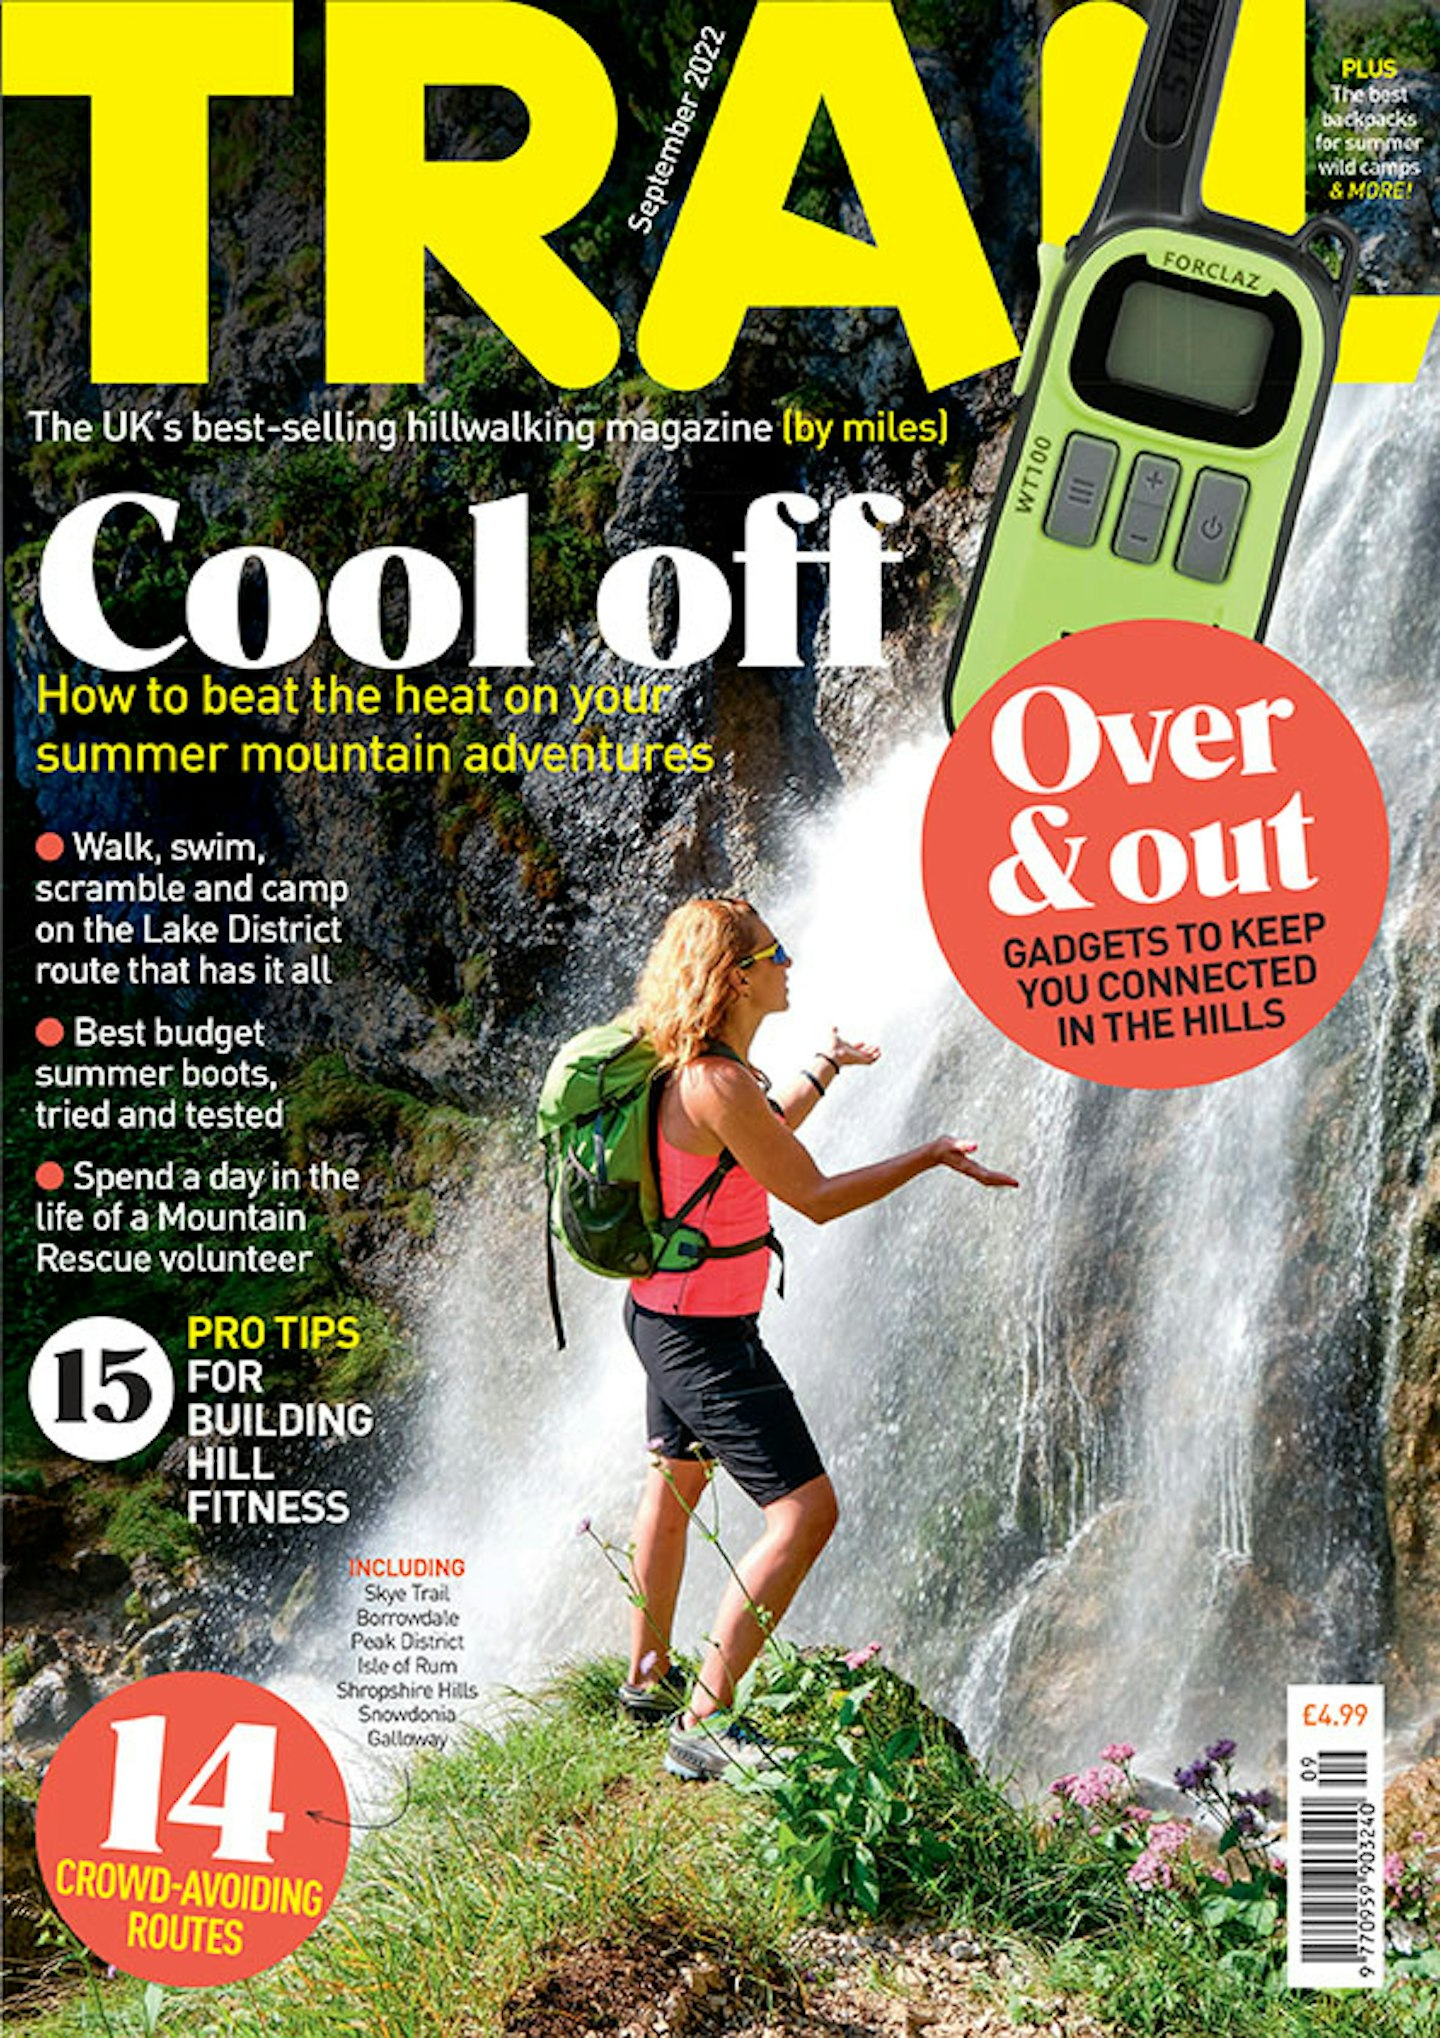 Front cover of the September 2022 issue of Trail magazine